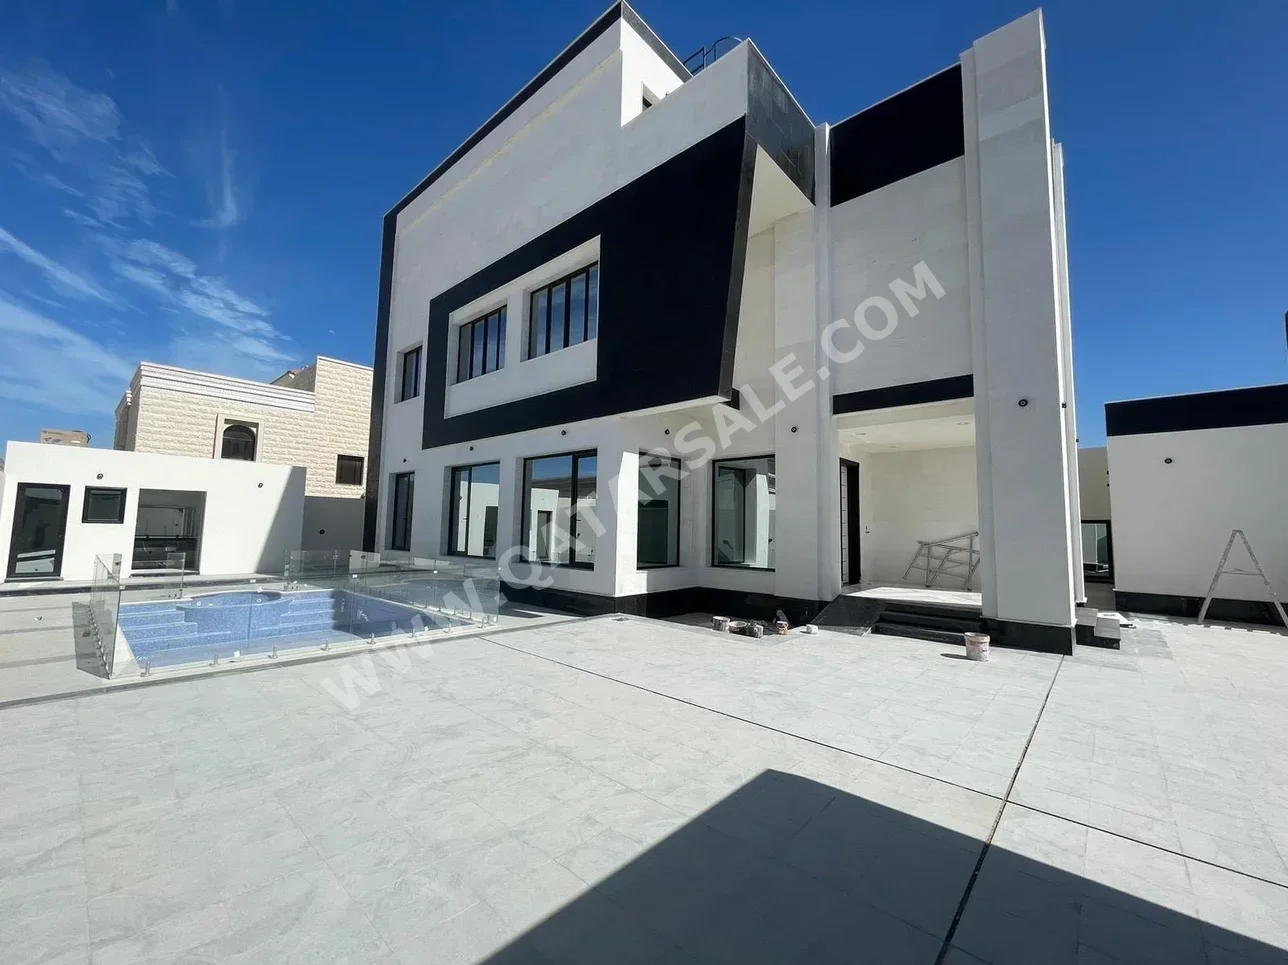 Family Residential  - Not Furnished  - Al Rayyan  - Izghawa  - 8 Bedrooms